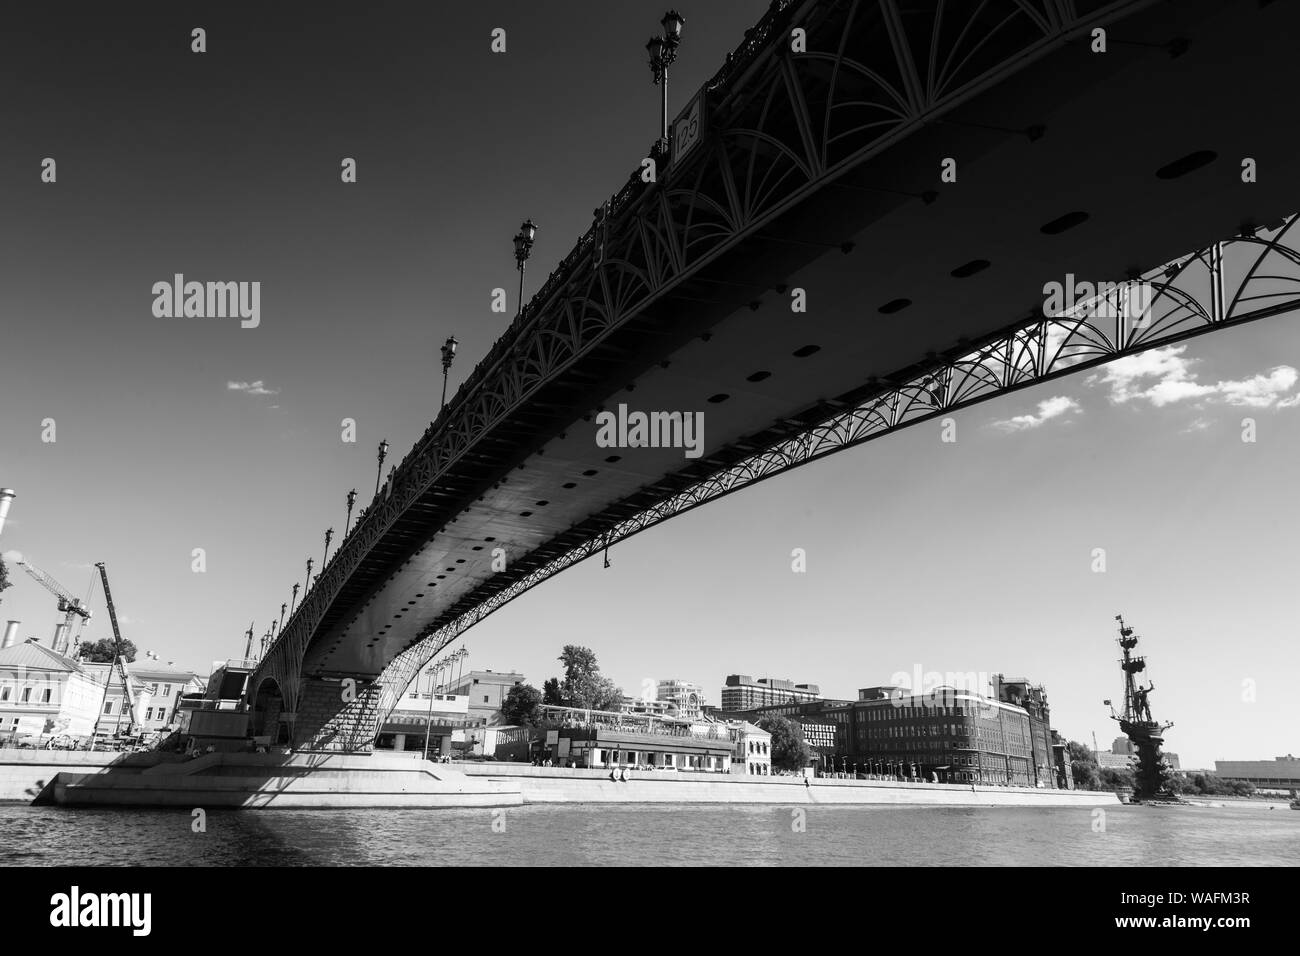 Moscow, Russia - July 04, 2015: Patriarshy Bridge In Black And White Stock Photo